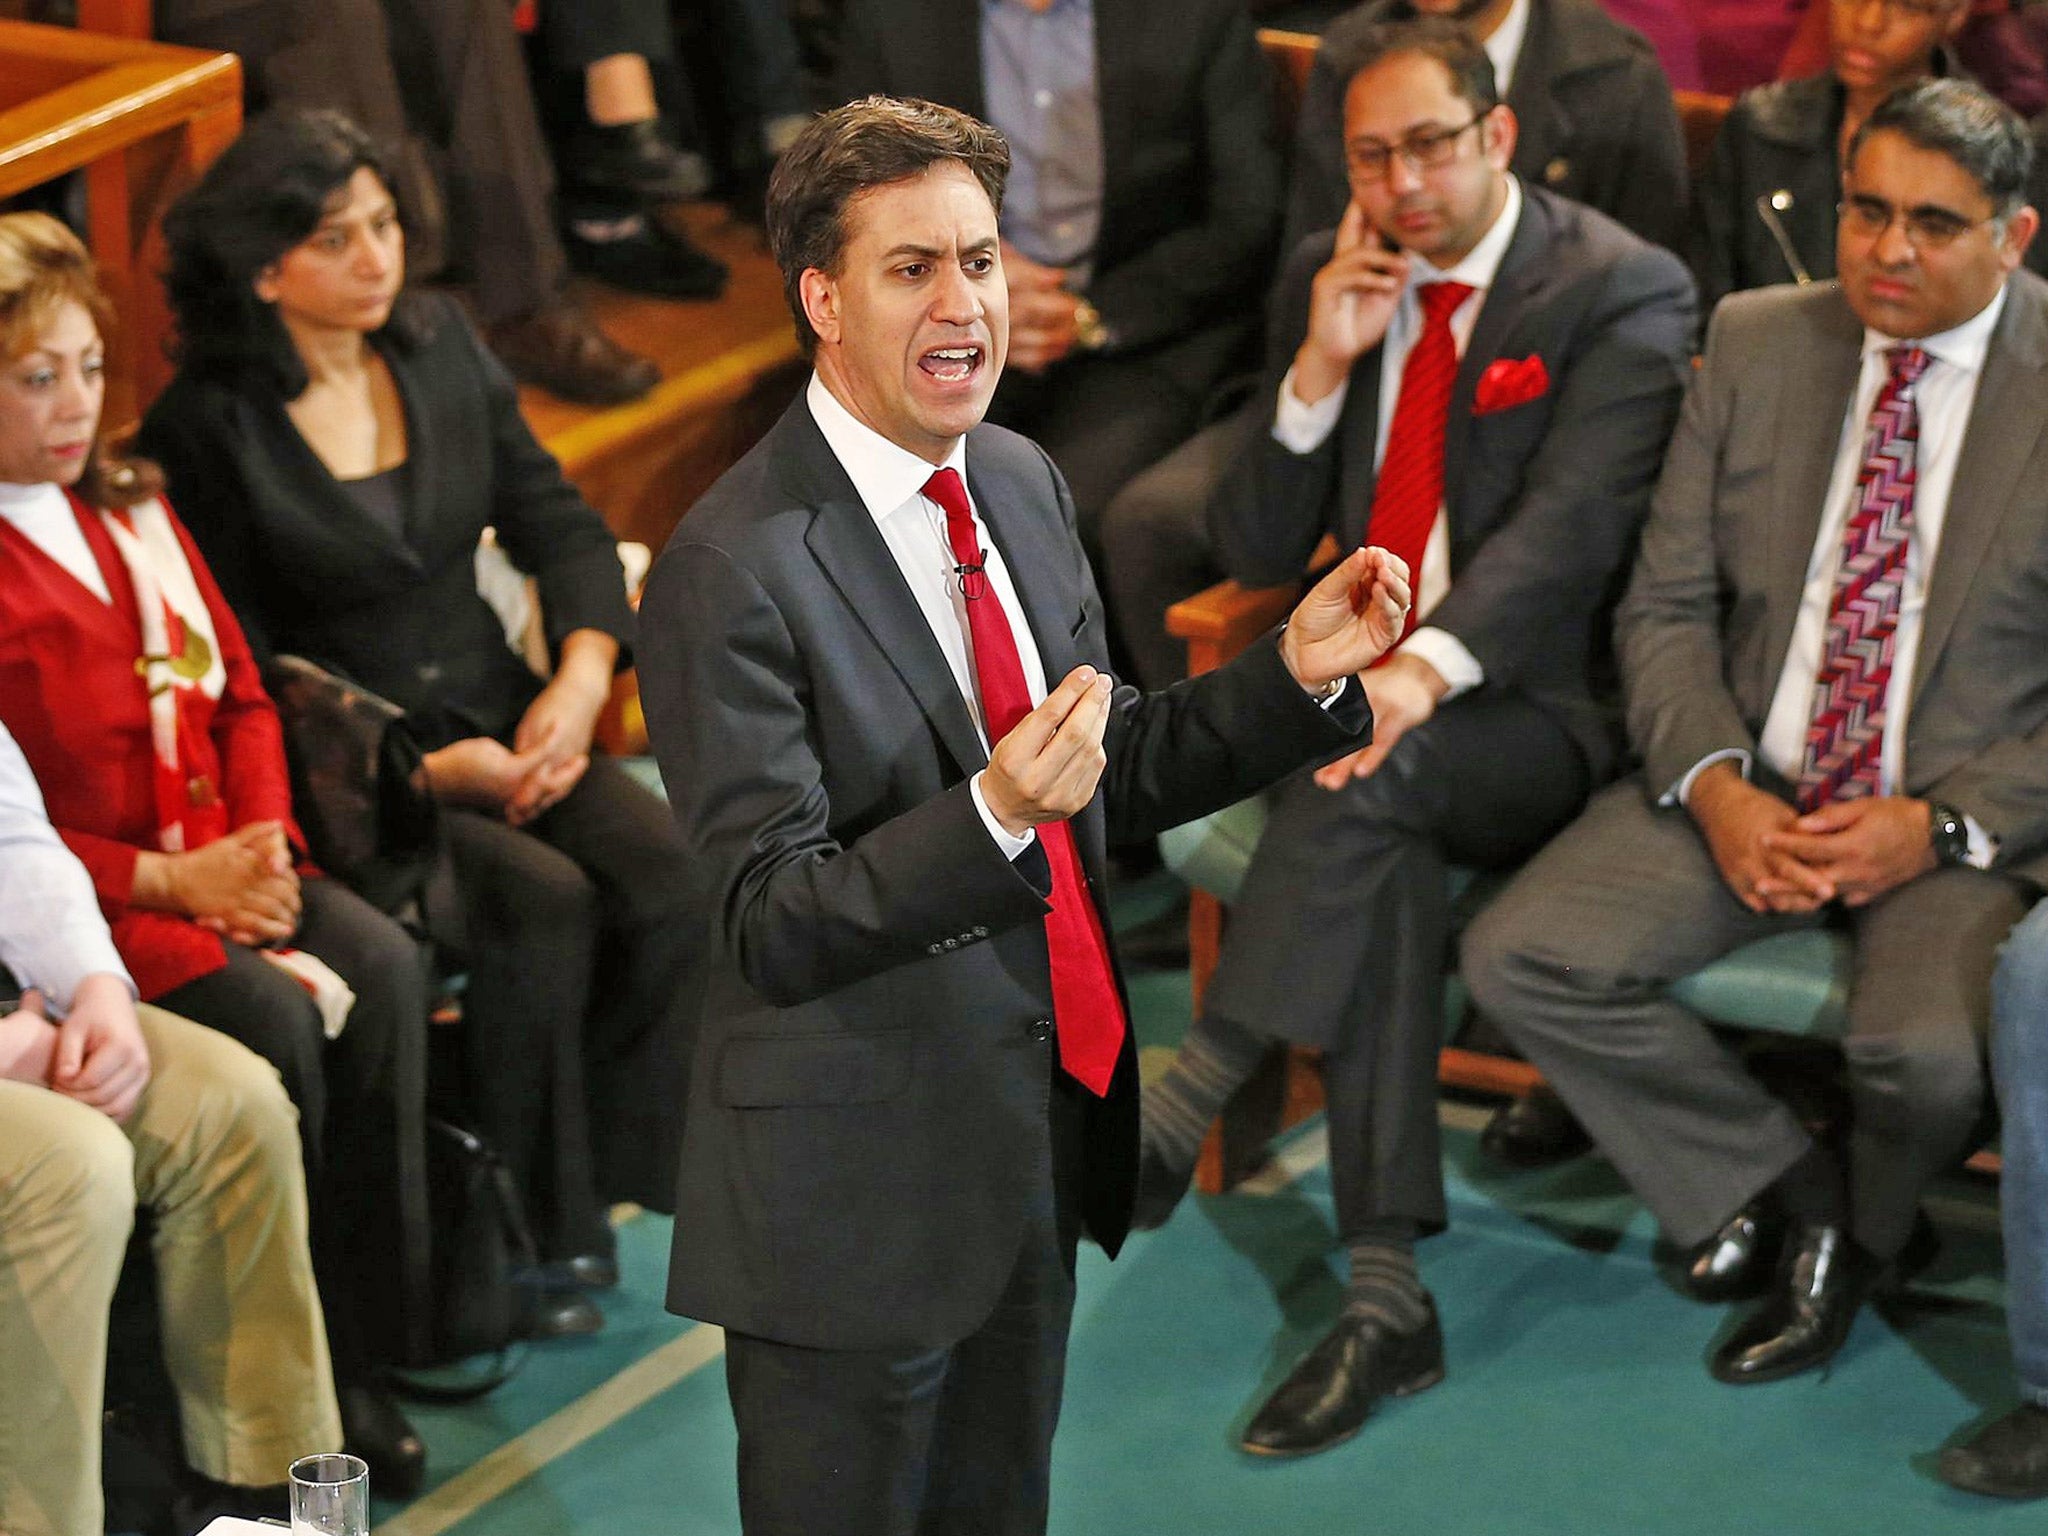 Miliband's plan is designed to give the regions a powerful voice in government